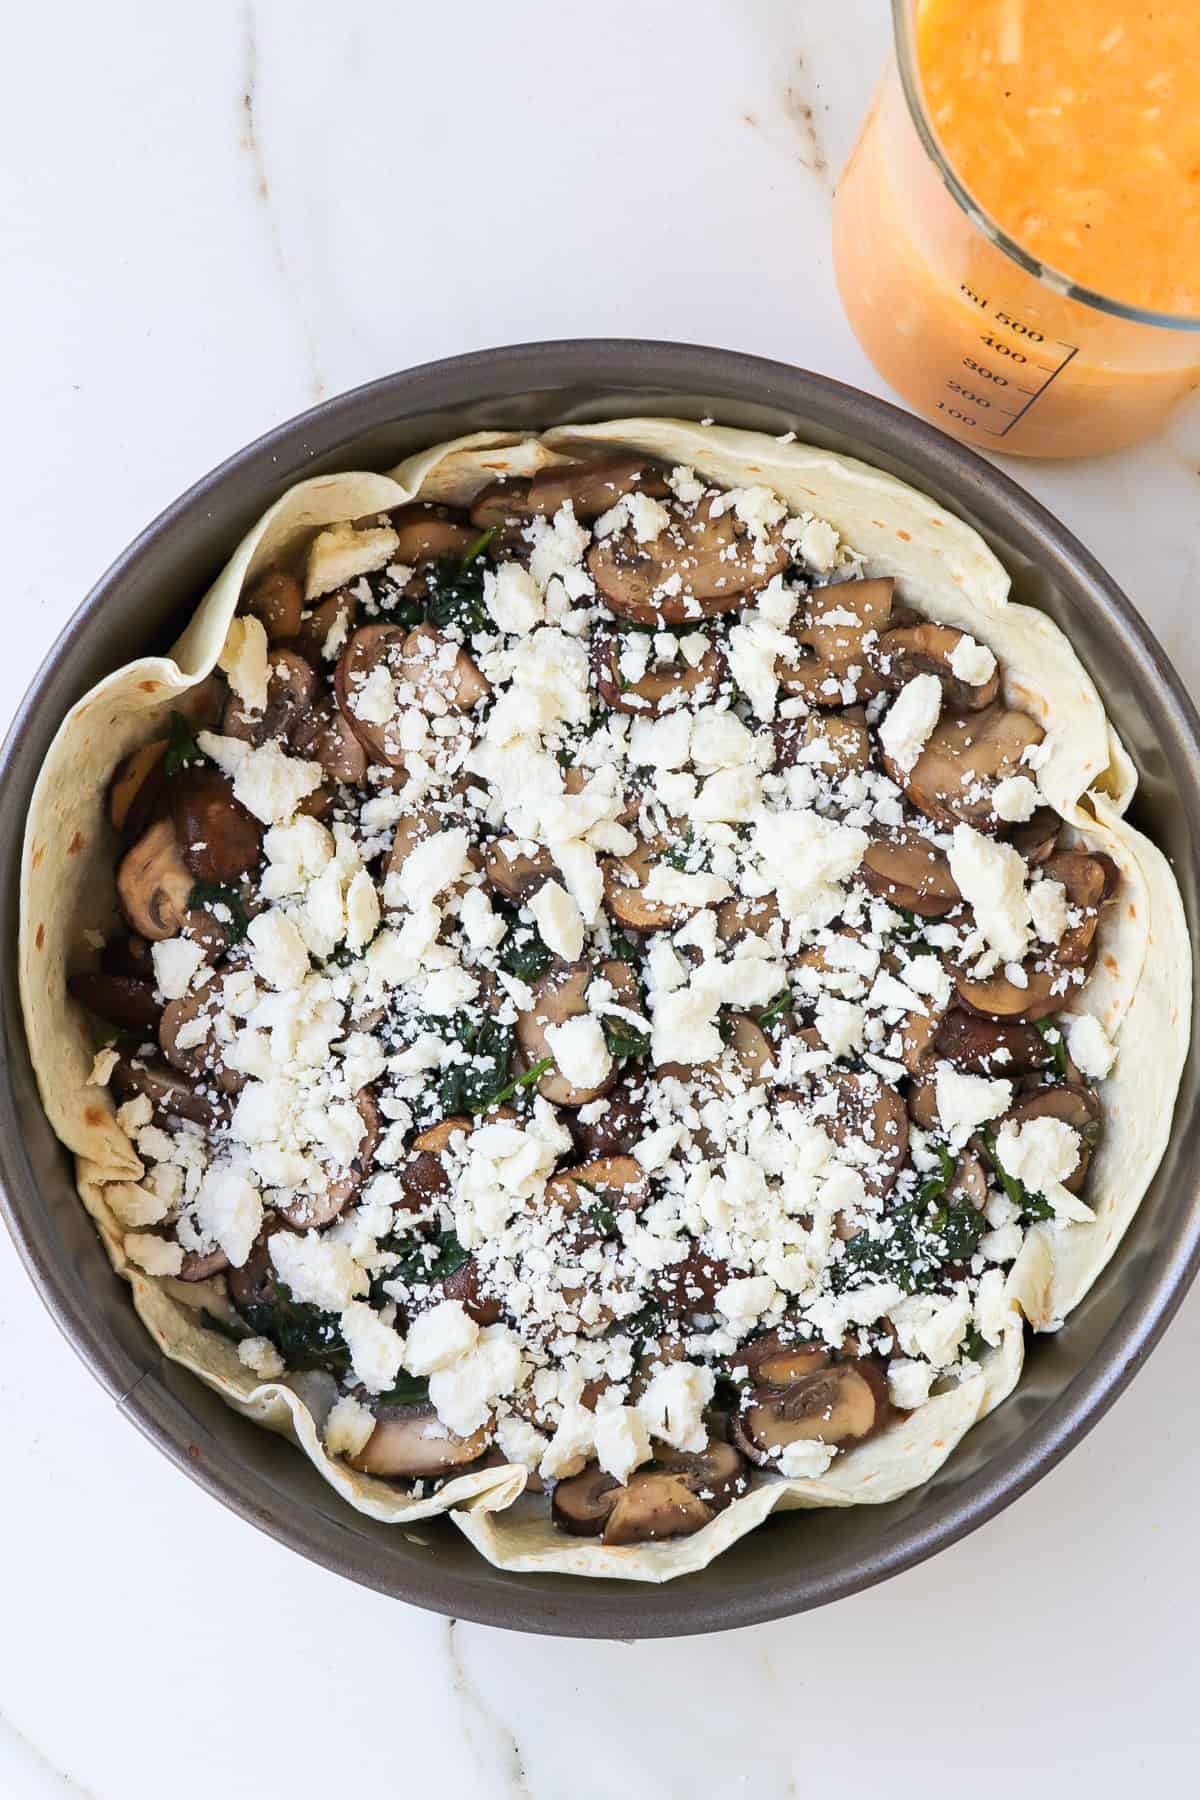 Springform pan with cooked mushrooms and feta in a tortilla shell.